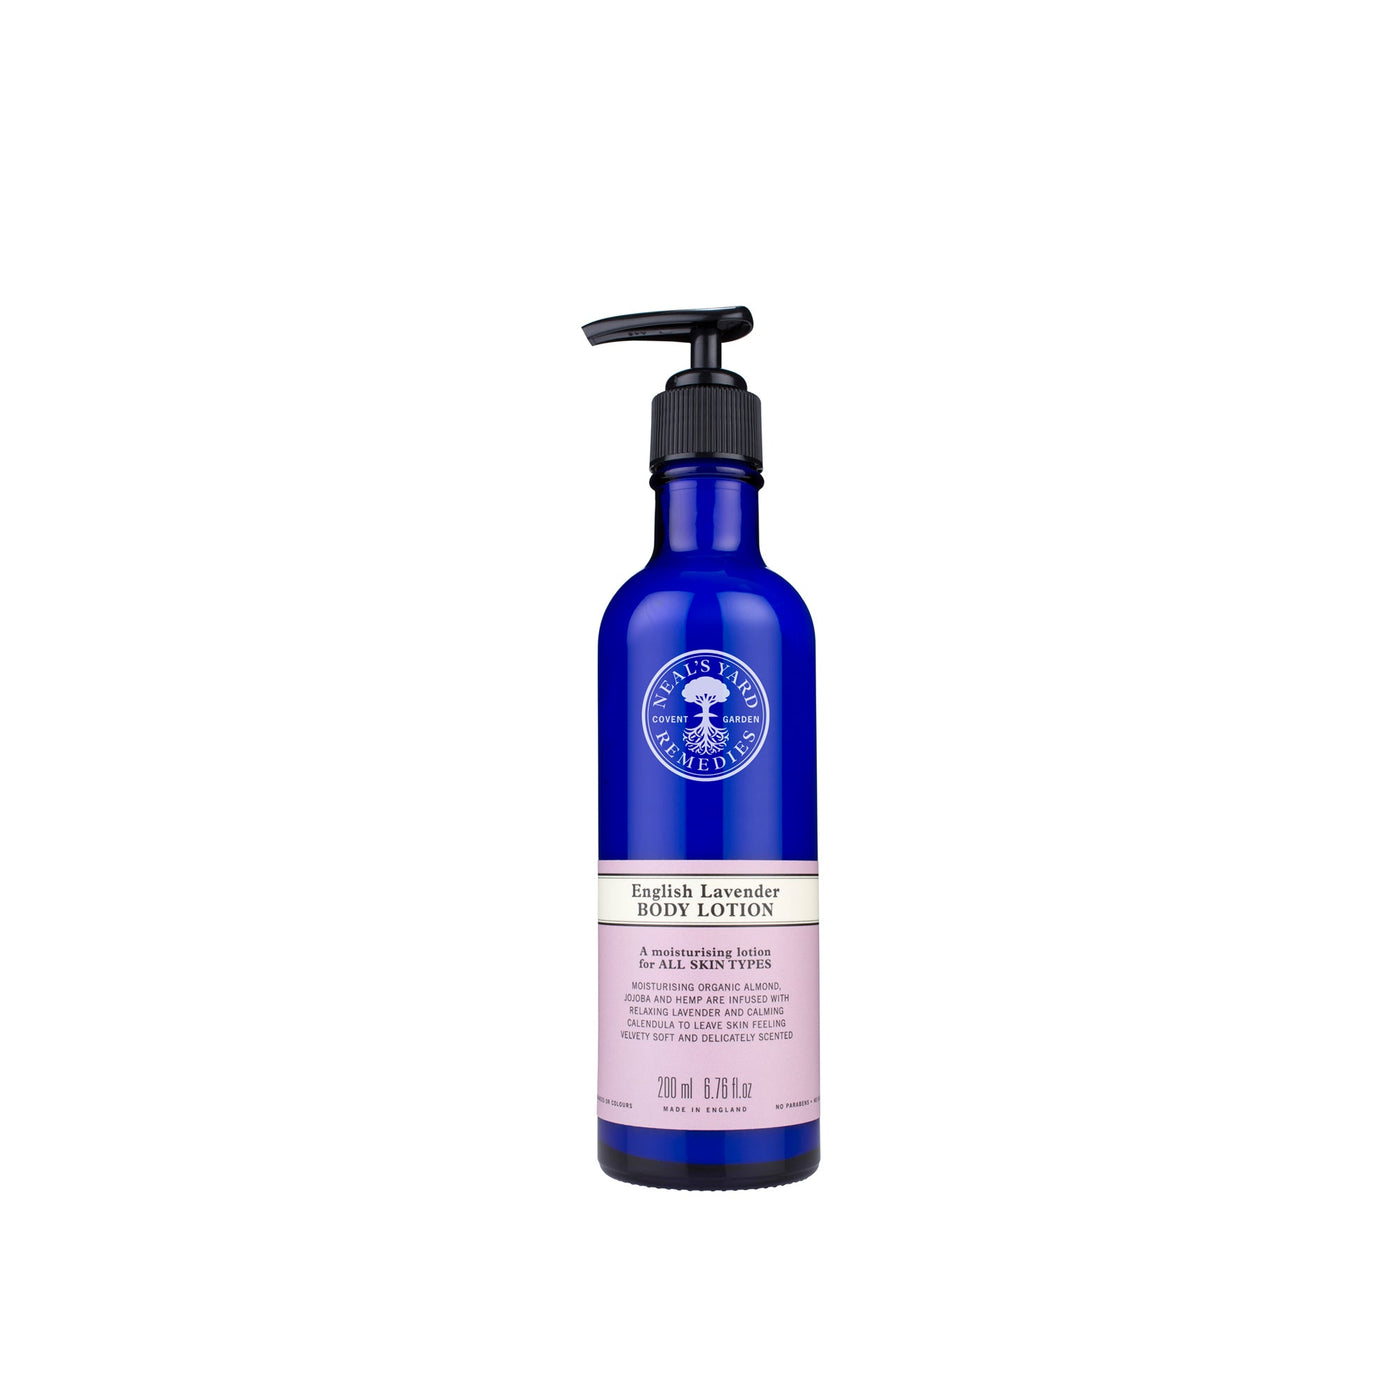 english-lavender-body-lotion-front-2310-high-res-2000px.jpg